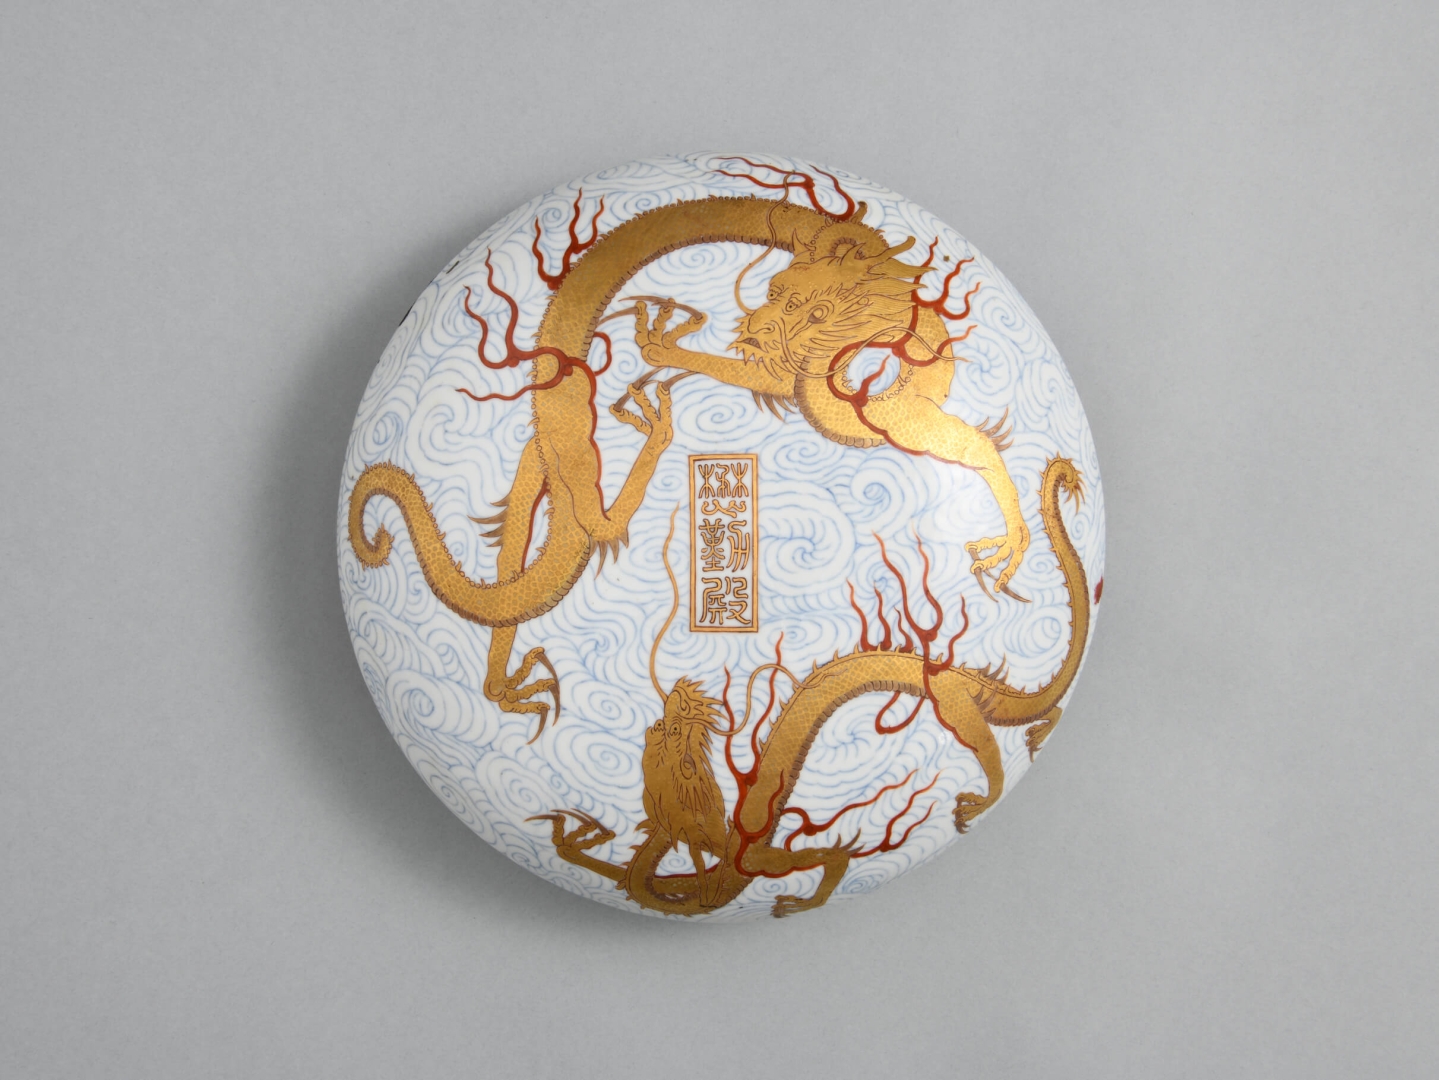 Seal Box with “Hall of <br />
Effusive Diligence” <br />
Mark and Dragon Design